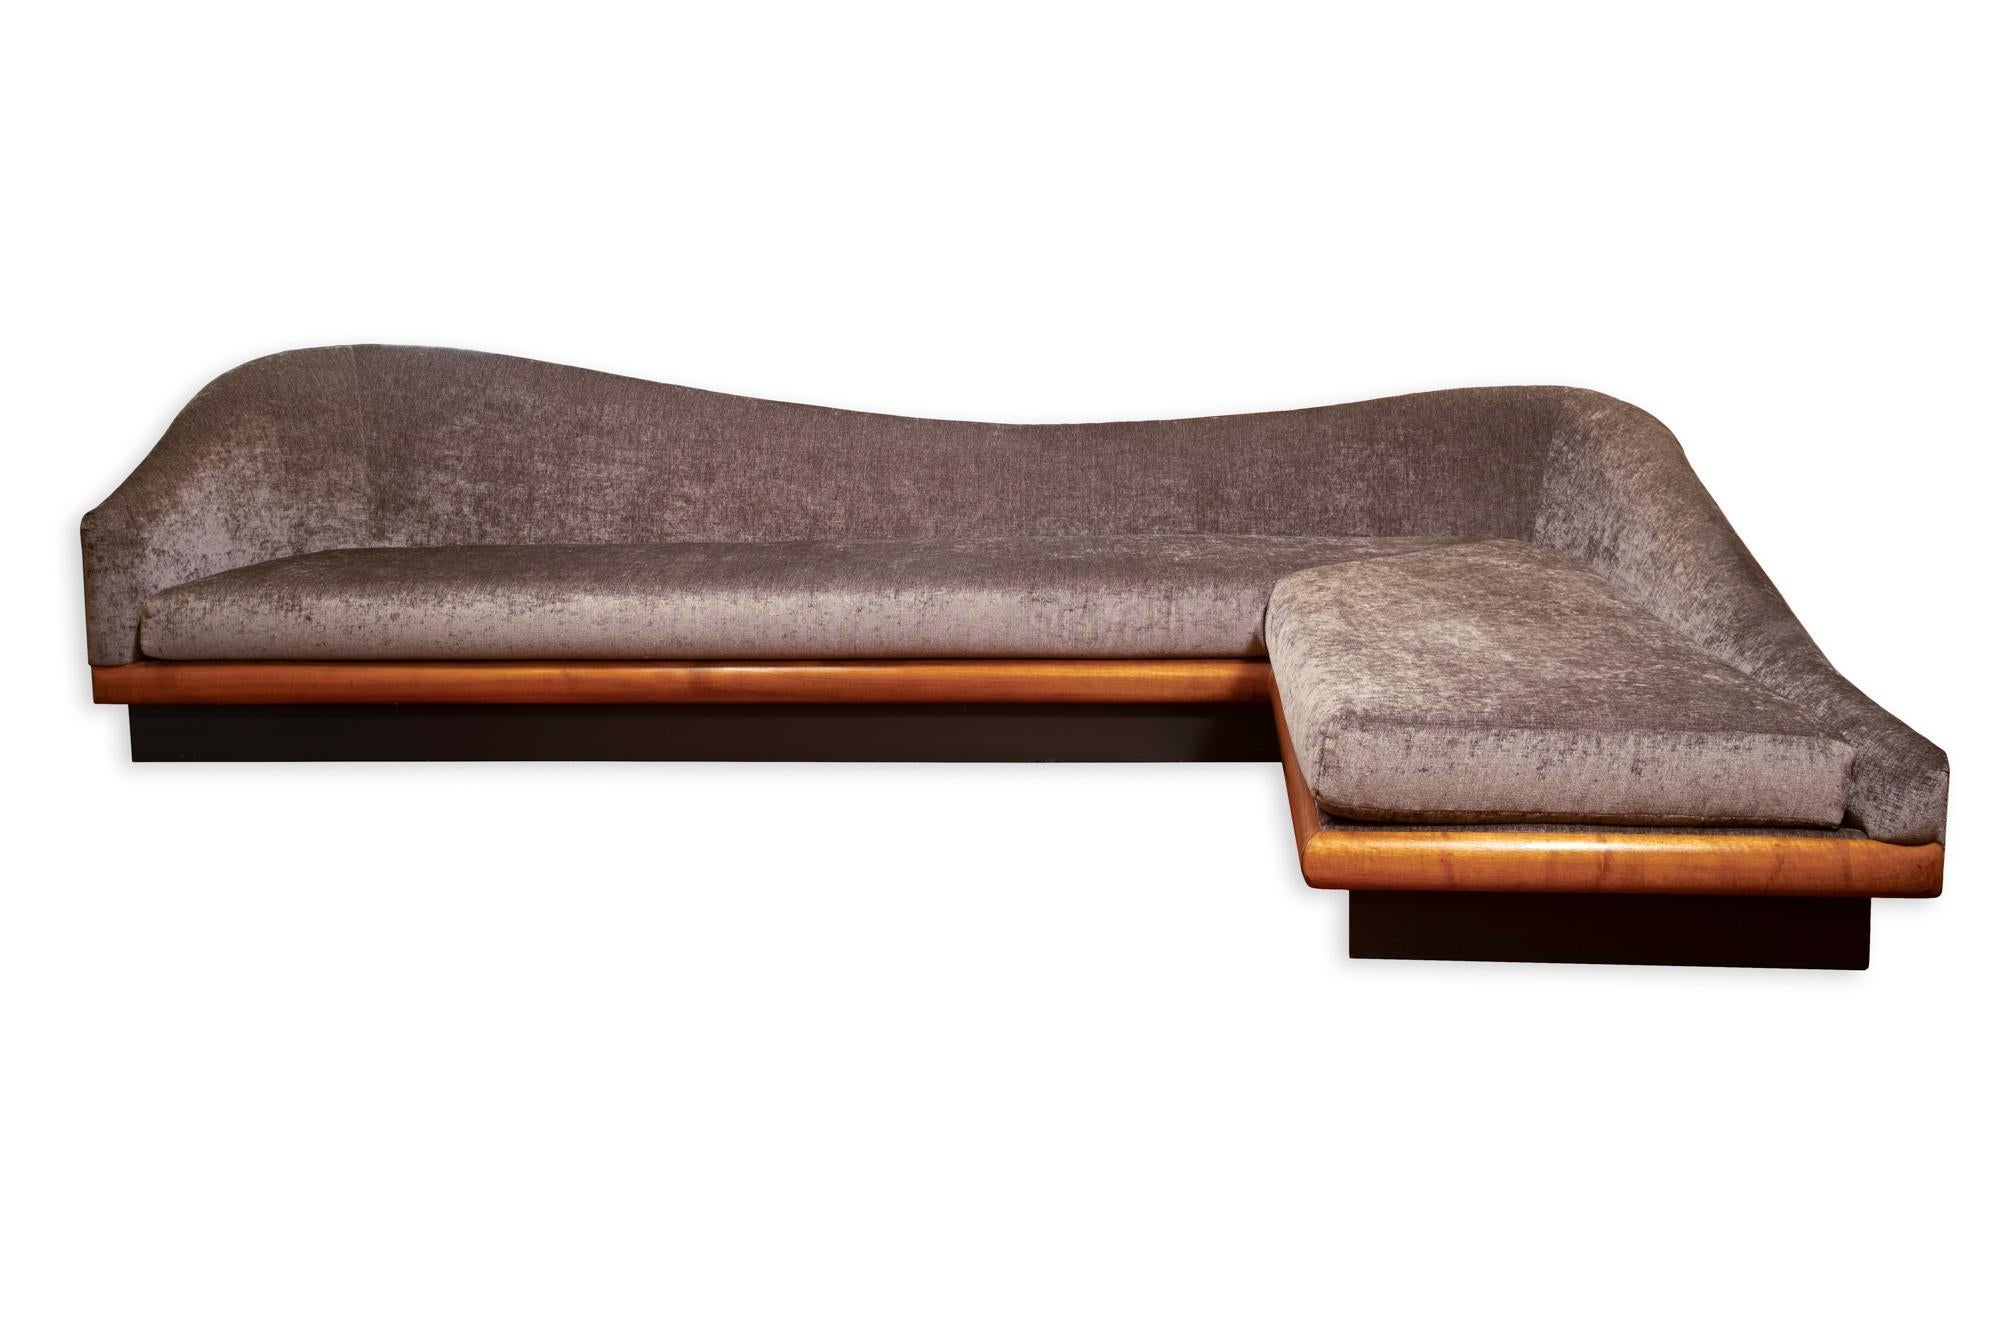 Adrian Pearsall mid century cloud sofa

Sofa measures: 124 wide x 72 deep x 31.5 inches high

All pieces of furniture can be had in what we call restored vintage condition. That means the piece is restored upon purchase so it’s free of